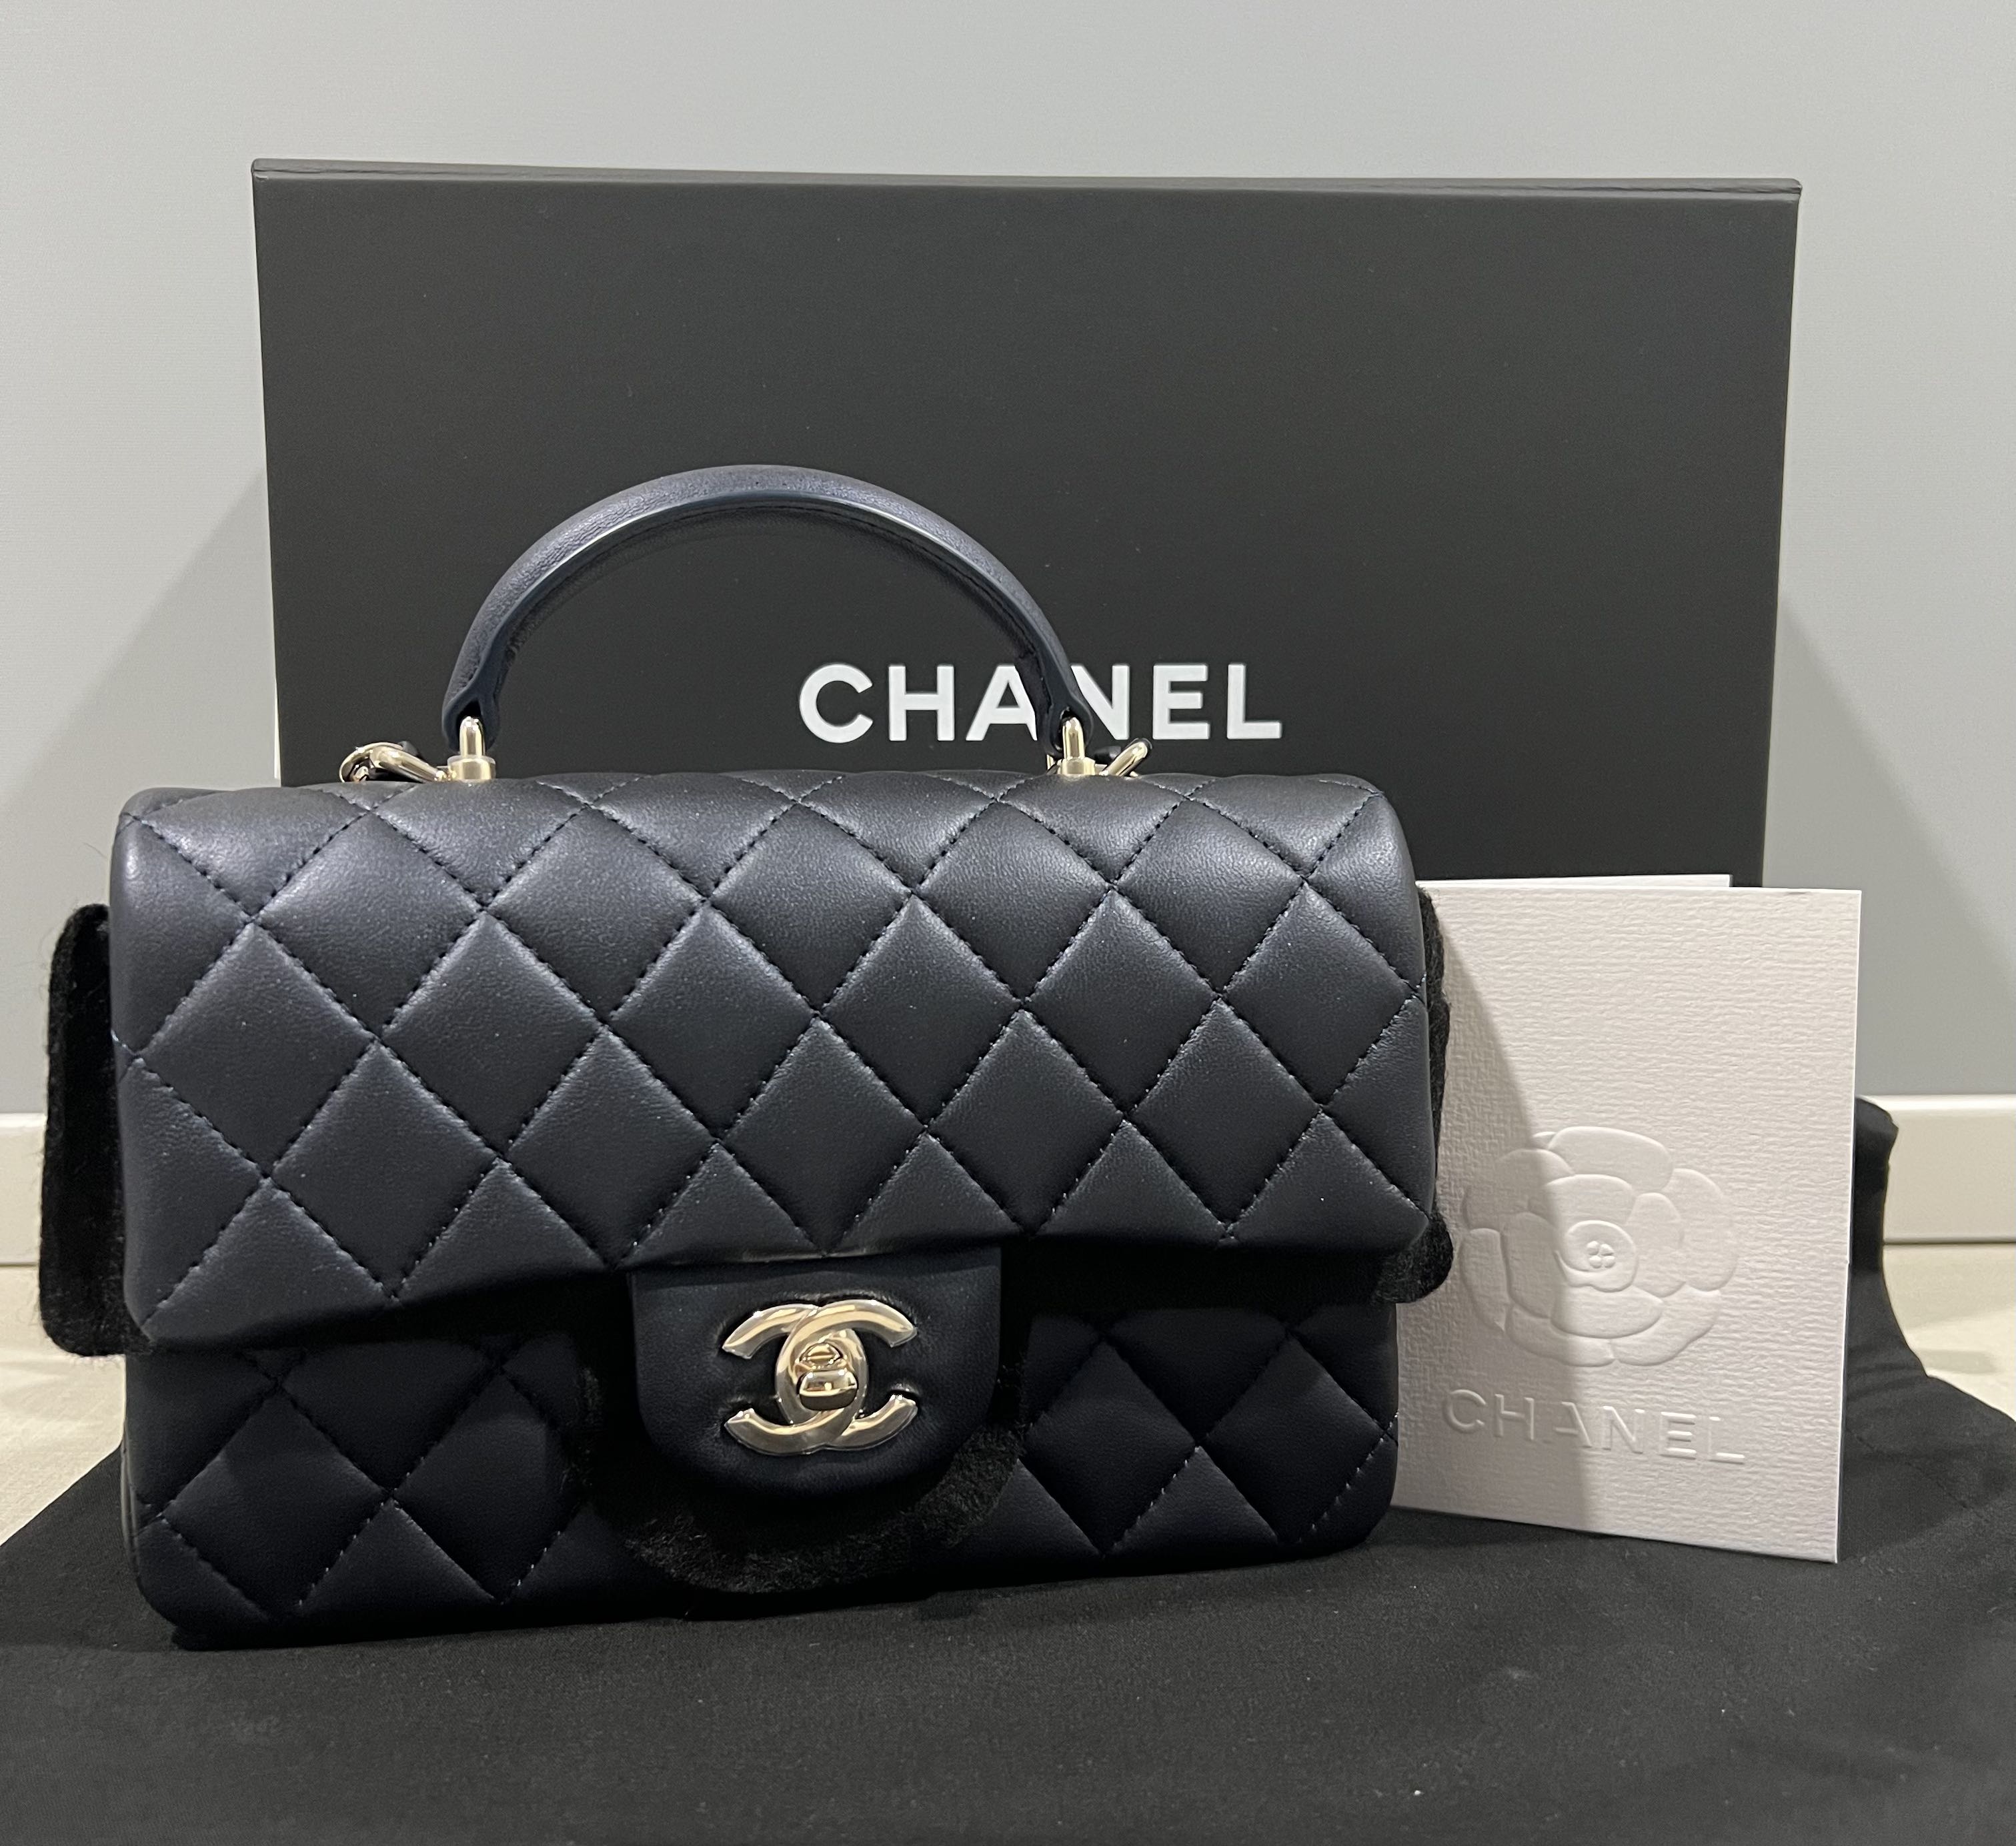 Chanel Mini Flap Bag with Top Handle in Dark Blue, Women's Fashion